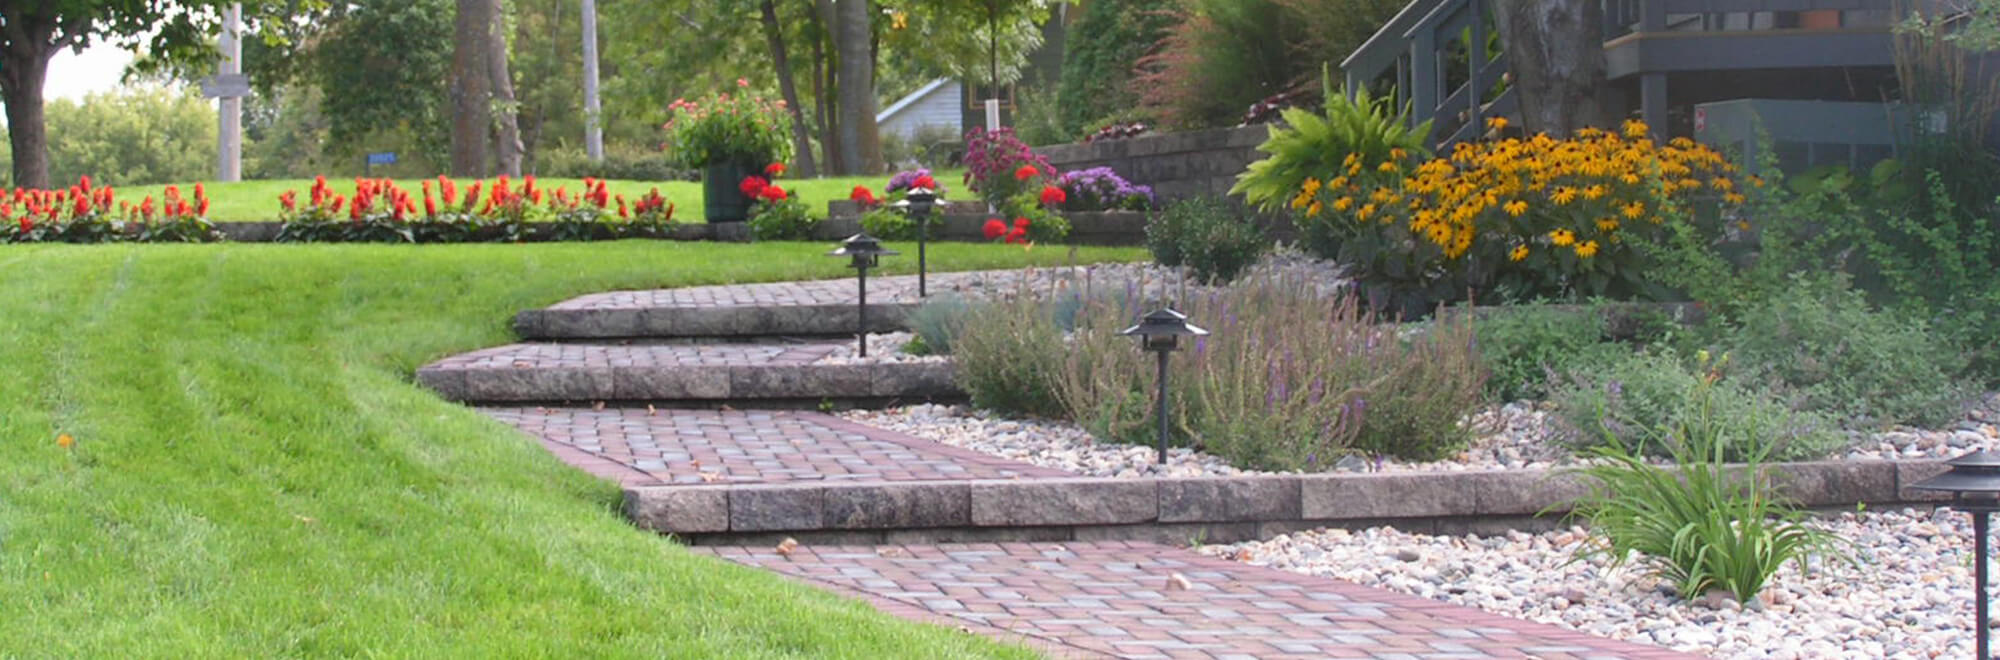 Home landscape complete with softscape flower gardens and stone paver steps